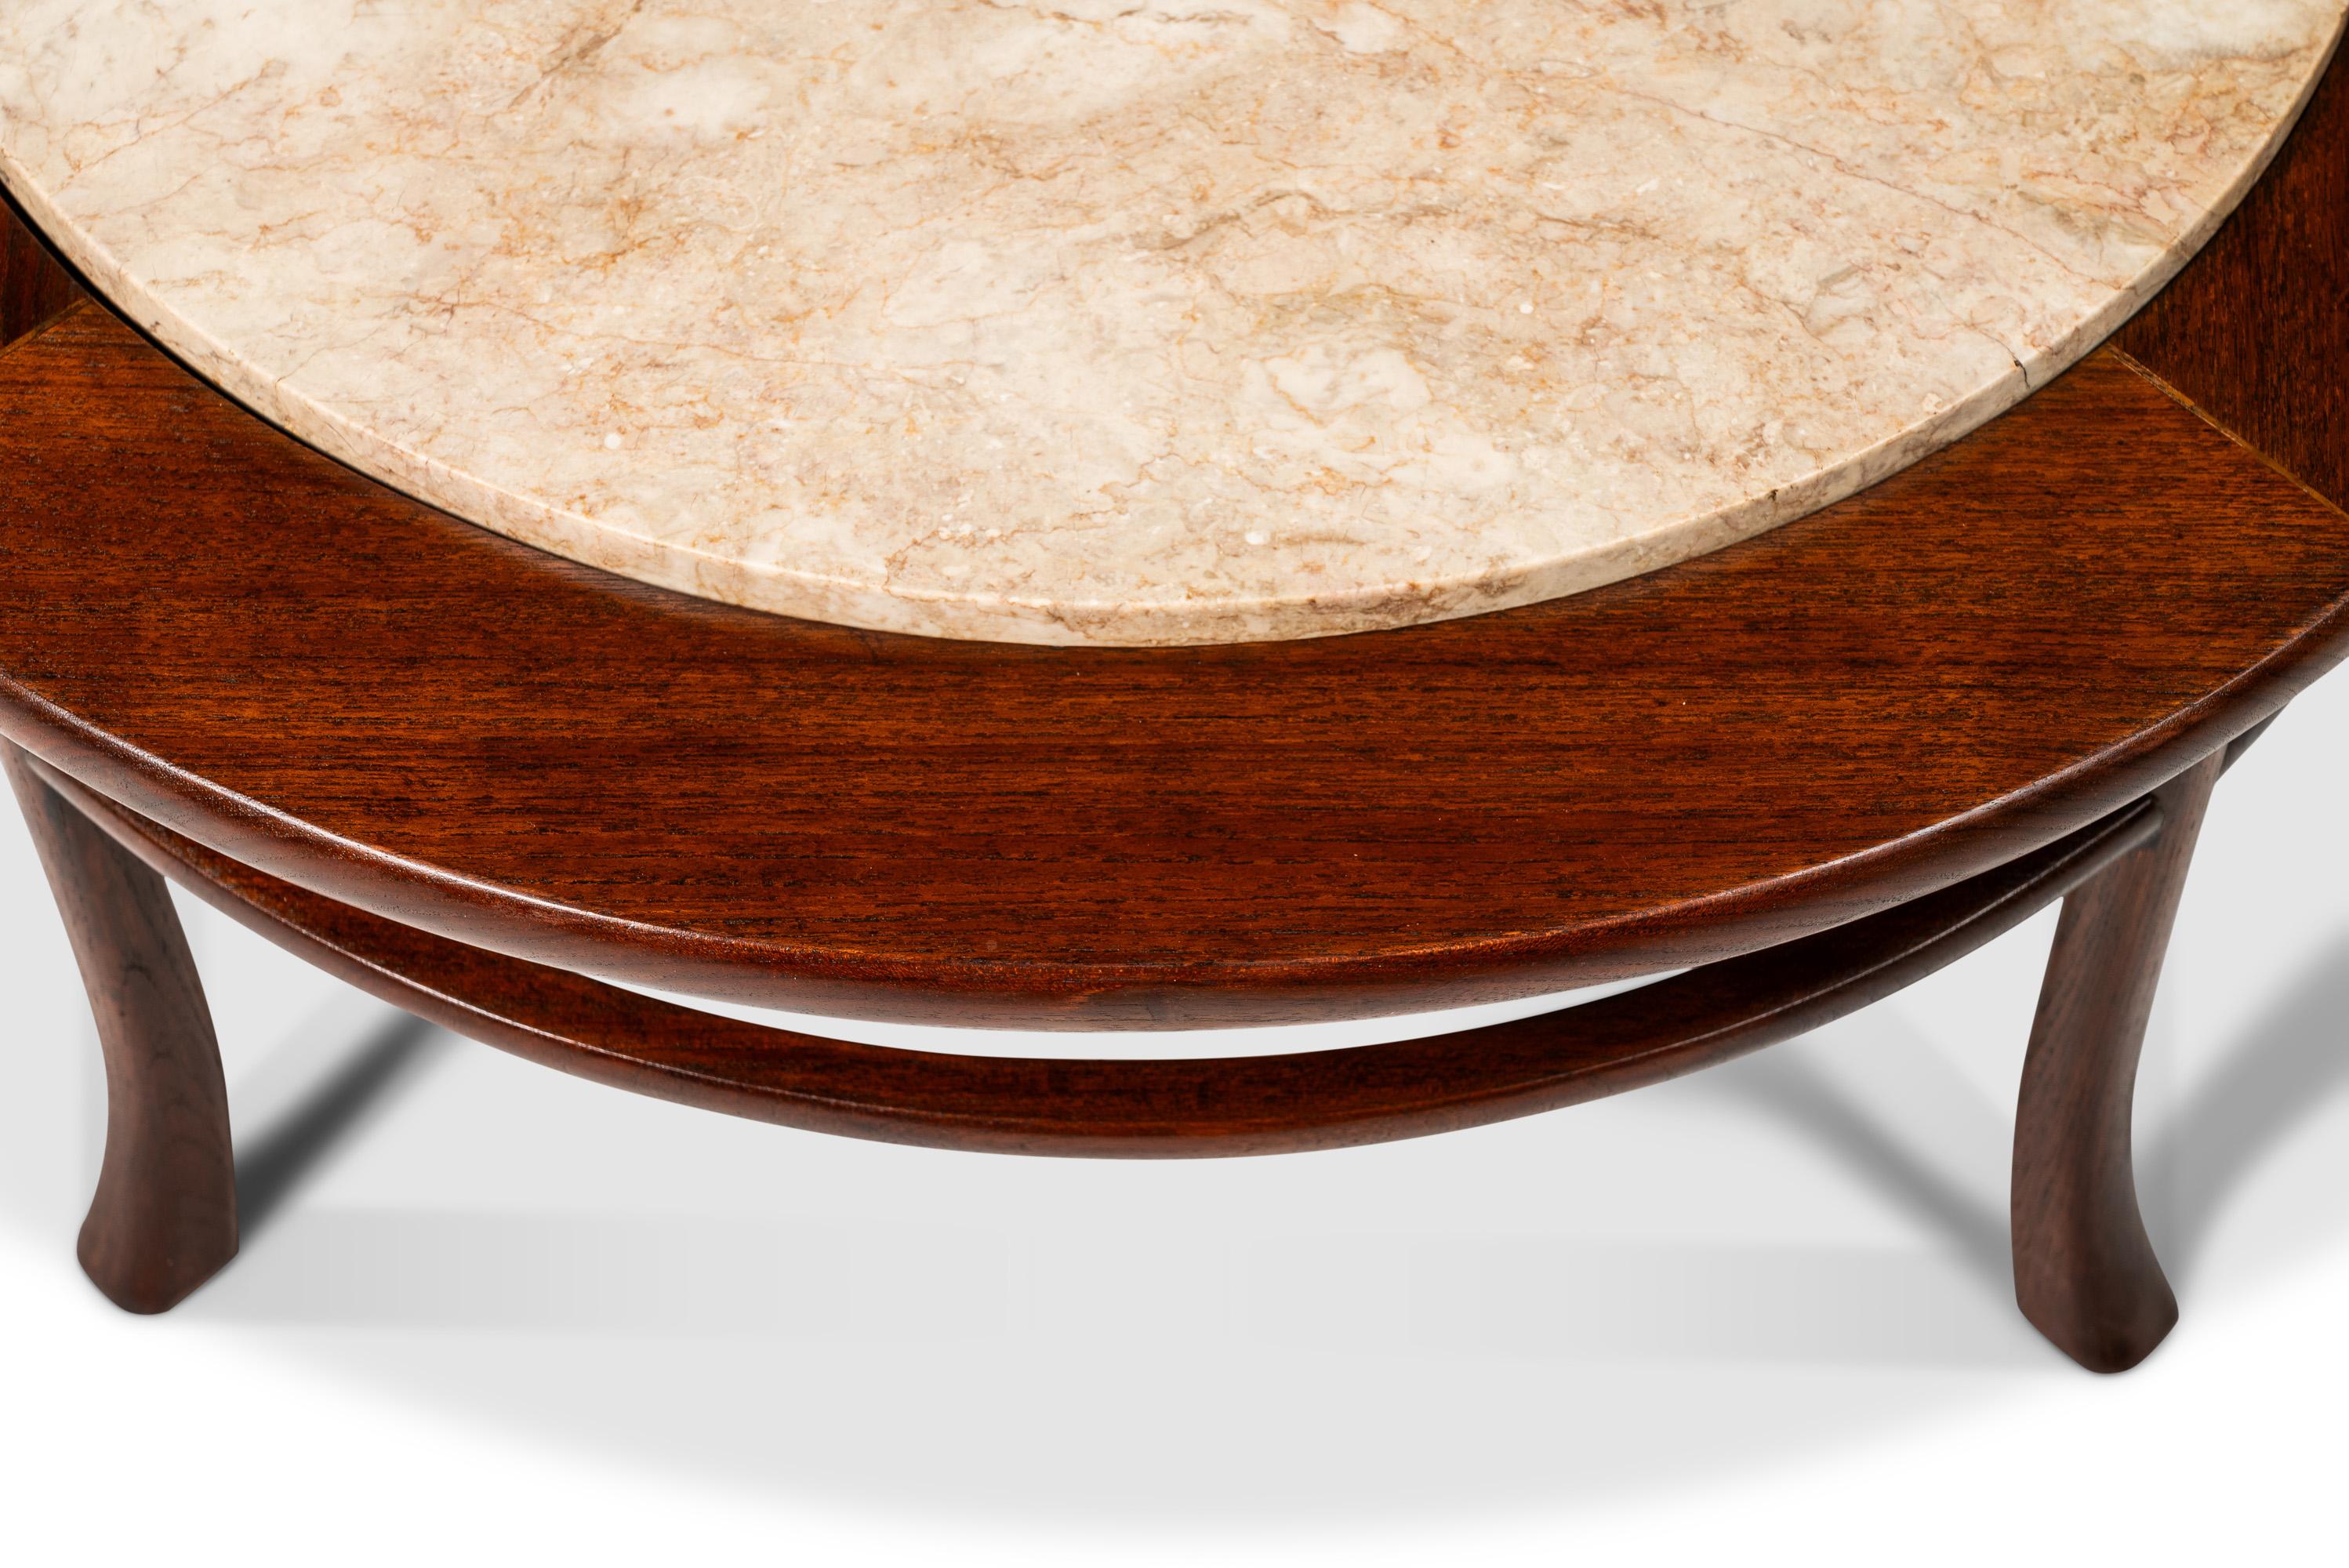 Walnut Coffee Table w/ Travertine Top Attributed to T.H. Robsjohn Gibbings, 1950 For Sale 1